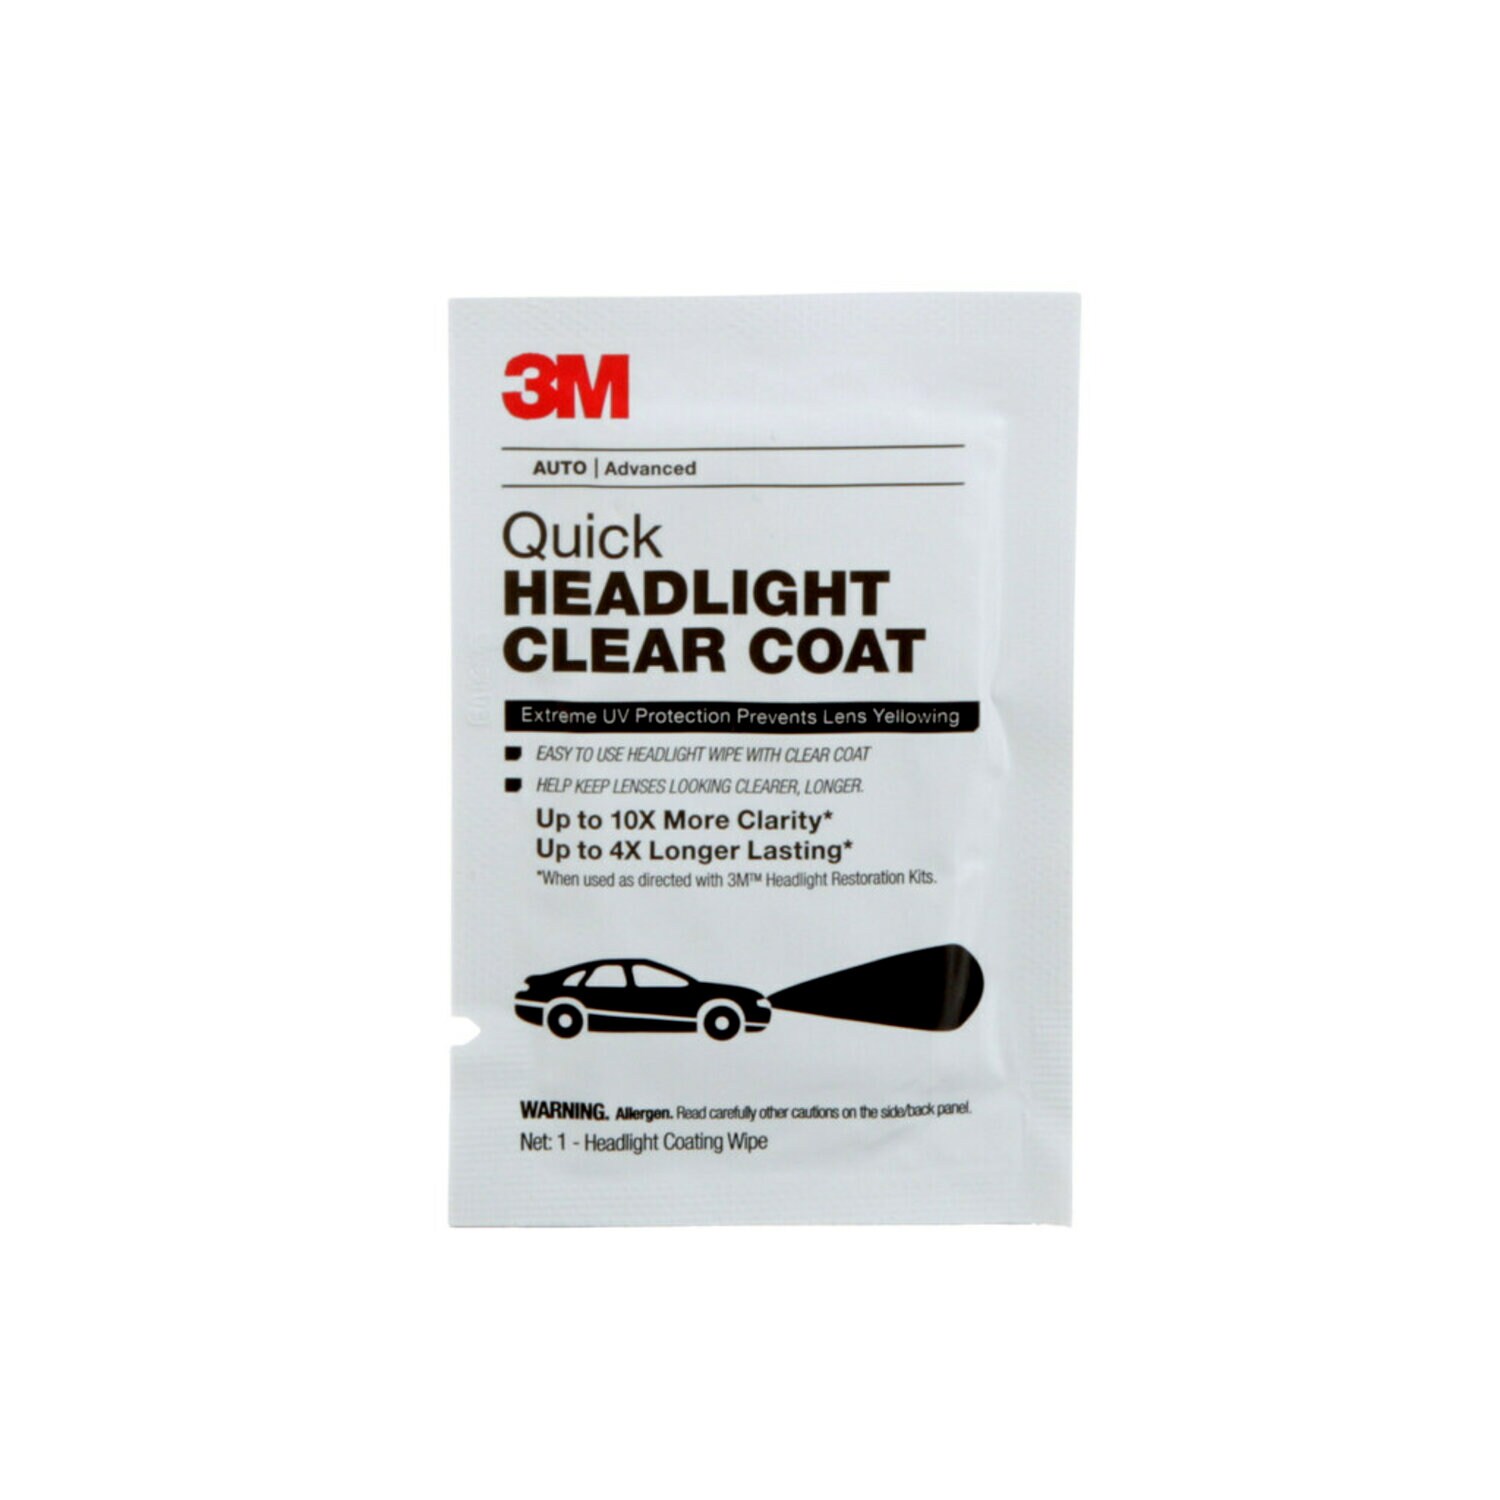 SMR-950 Buffing Compound for use on Fresh Clearcoat , Quart